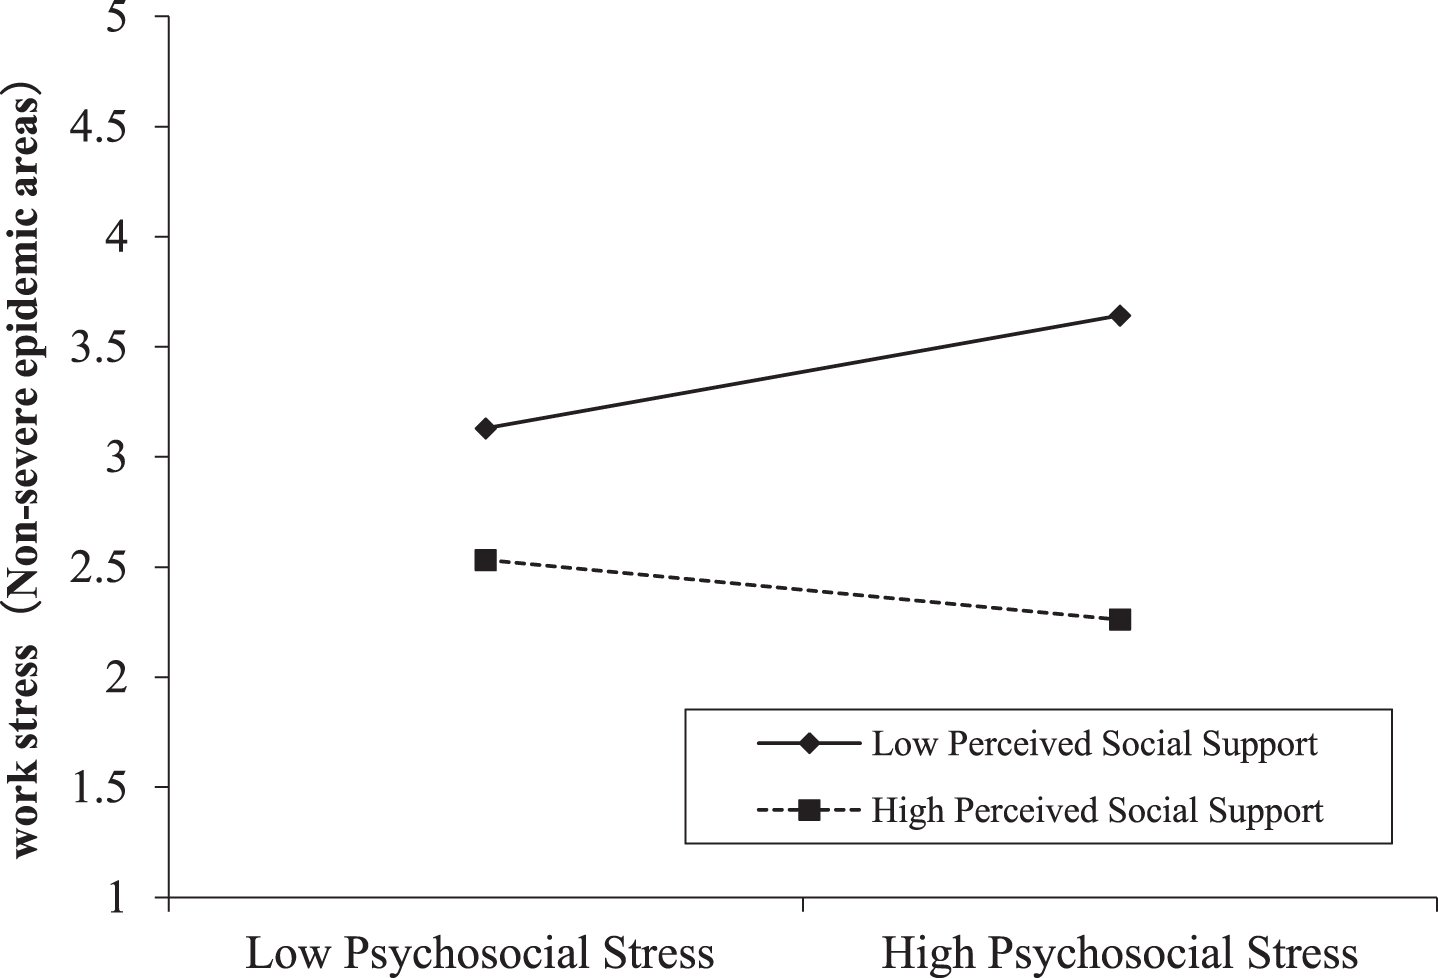 Moderating effect of perceived social support between psychosocial stress and work stress in non-severe epidemic areas.